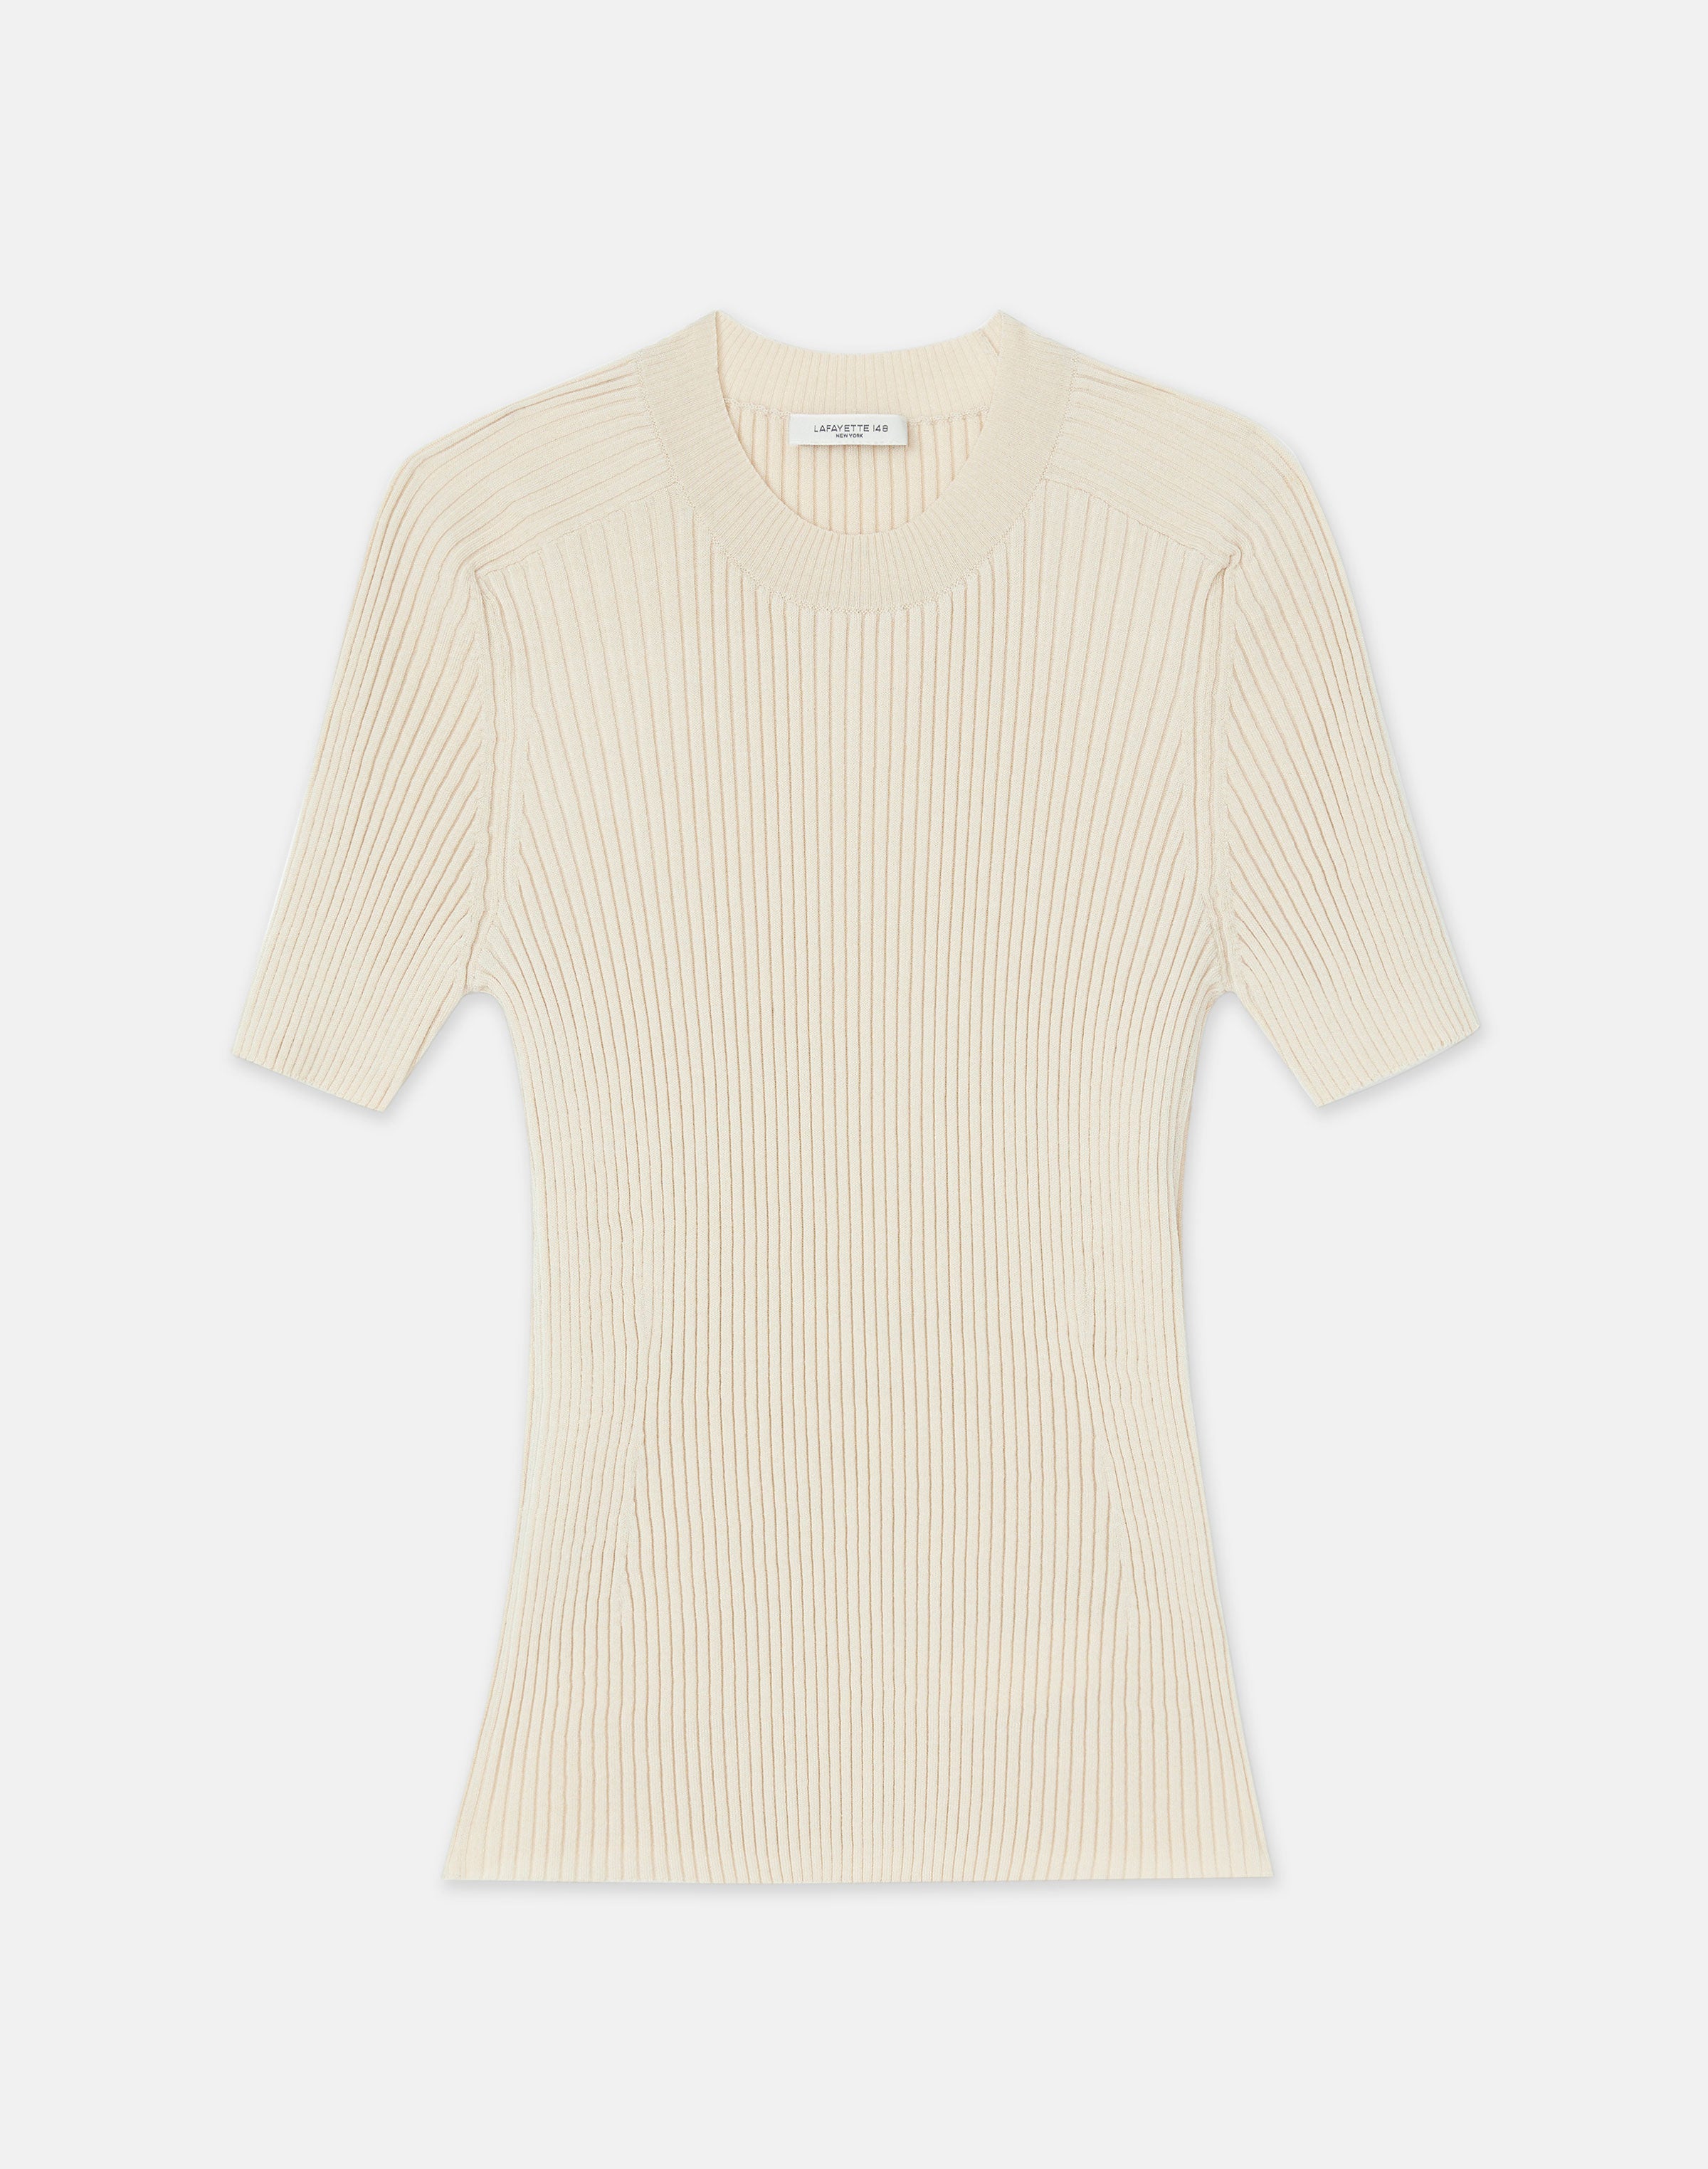 Lafayette 148 New York, Finespun Voile Ribbed Knit Top